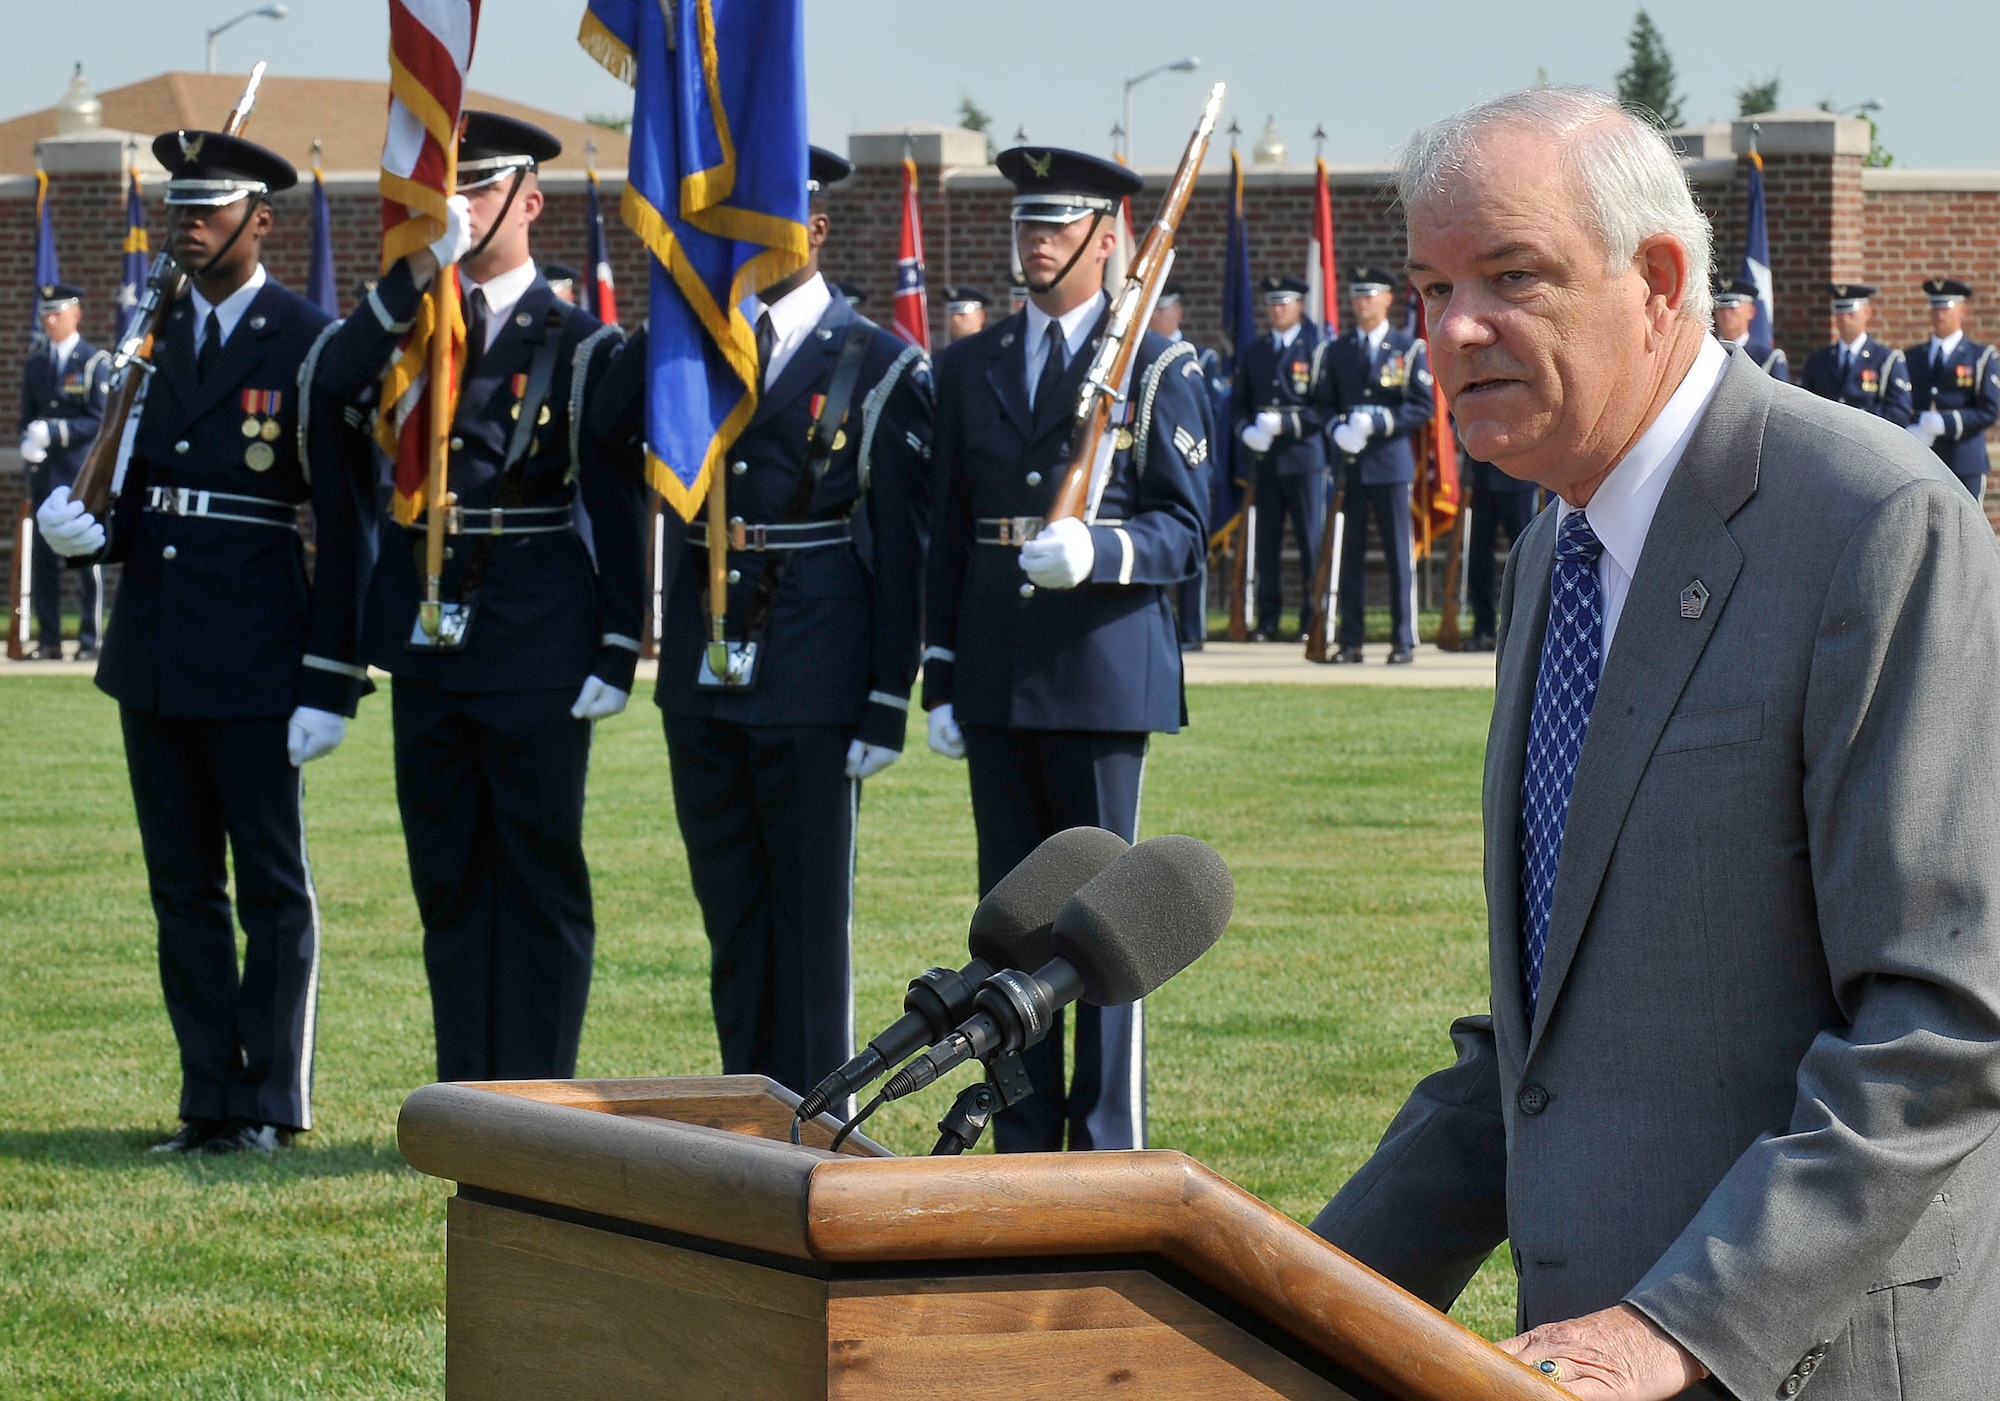 Michael Wynne, the former Secretary of the Air Force, honors Gen. T. Michael Moseley during the latter's retirement ceremony on Bolling Air Force Base, D.C., July 11. General Moseley is the 18th chief of staff. (U.S. Air Force photo/Scott M. Ash)